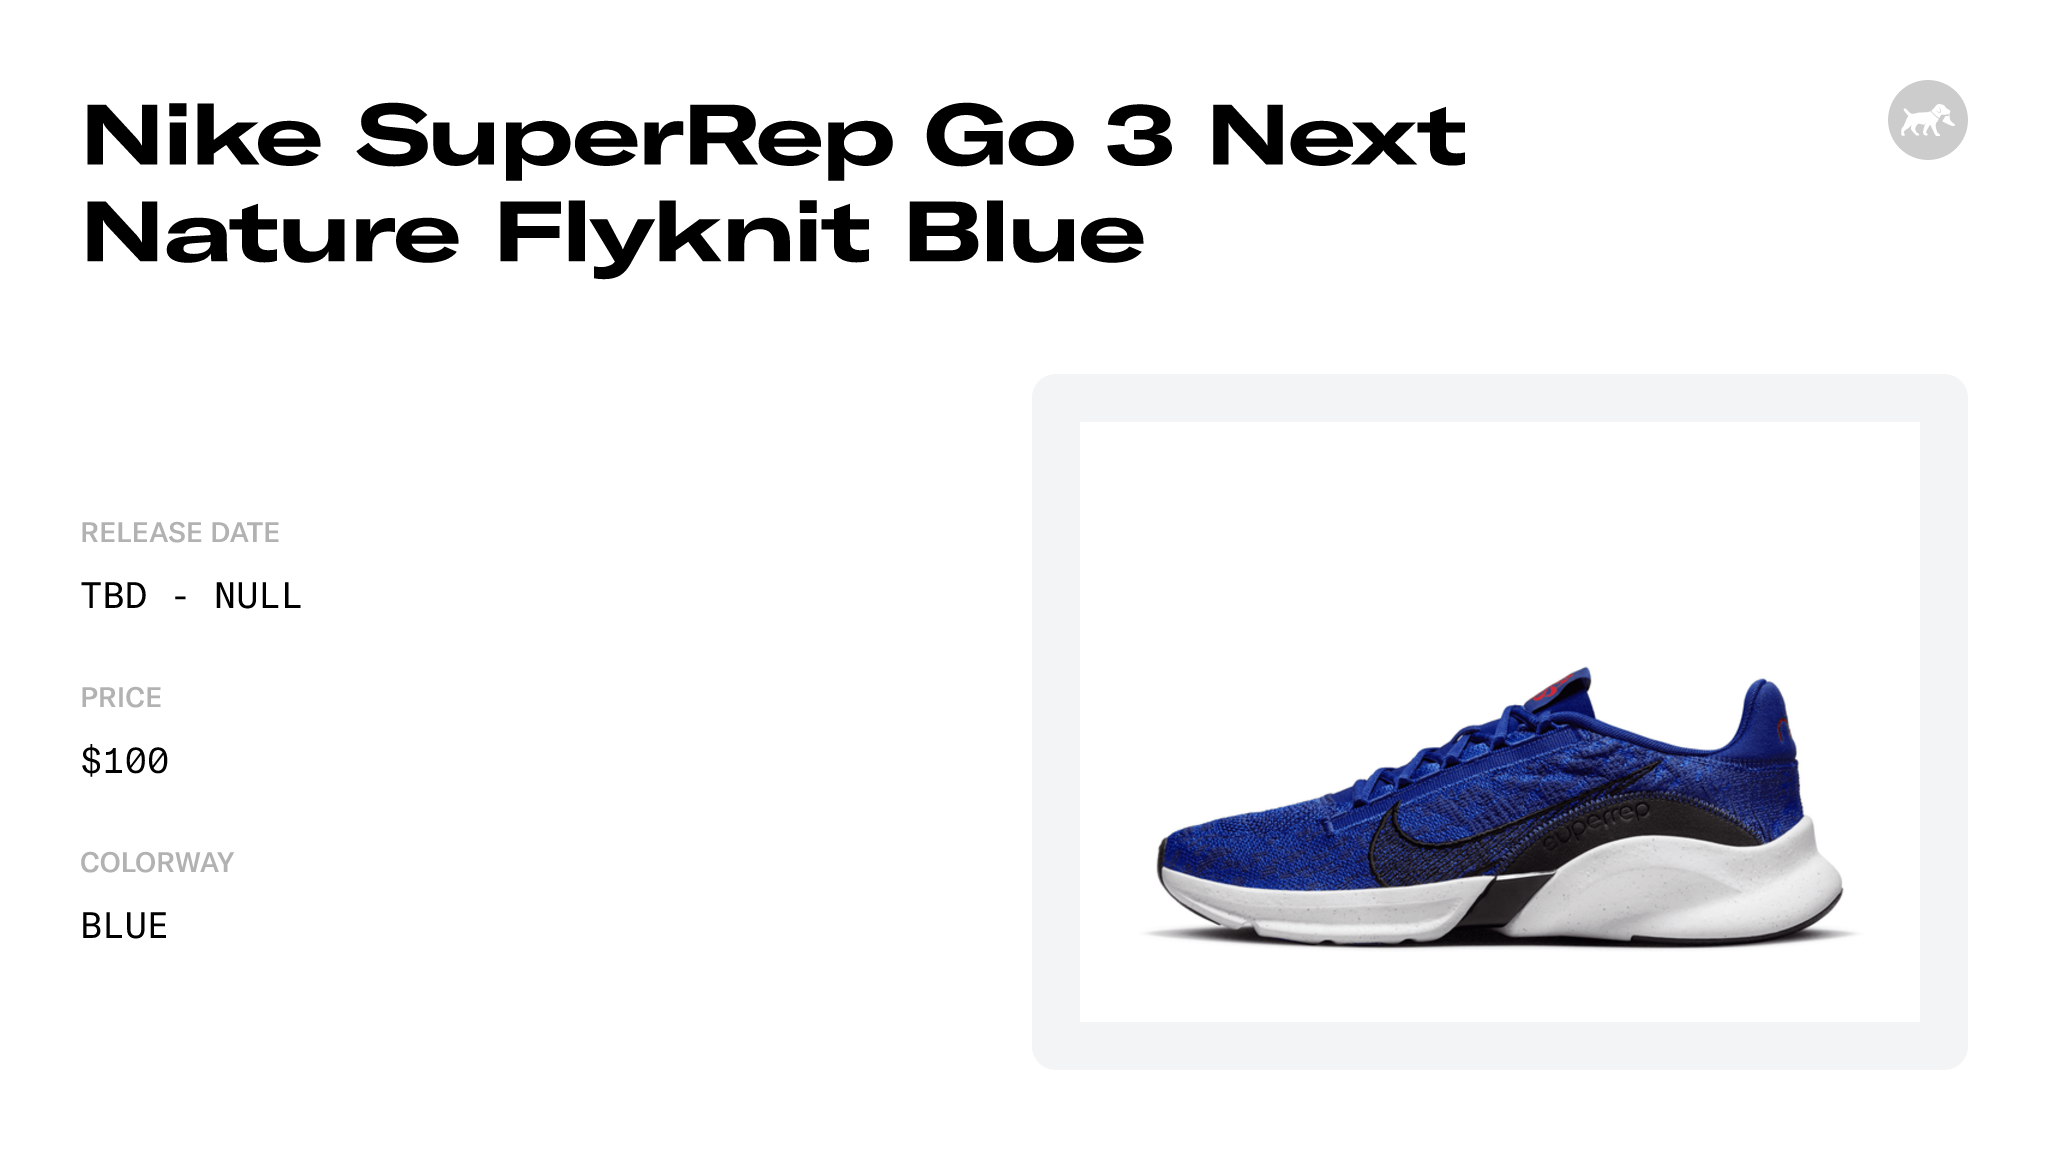 Nike SuperRep Go 3 Next Nature Flyknit Blue - DH3394-400 Raffles and ...